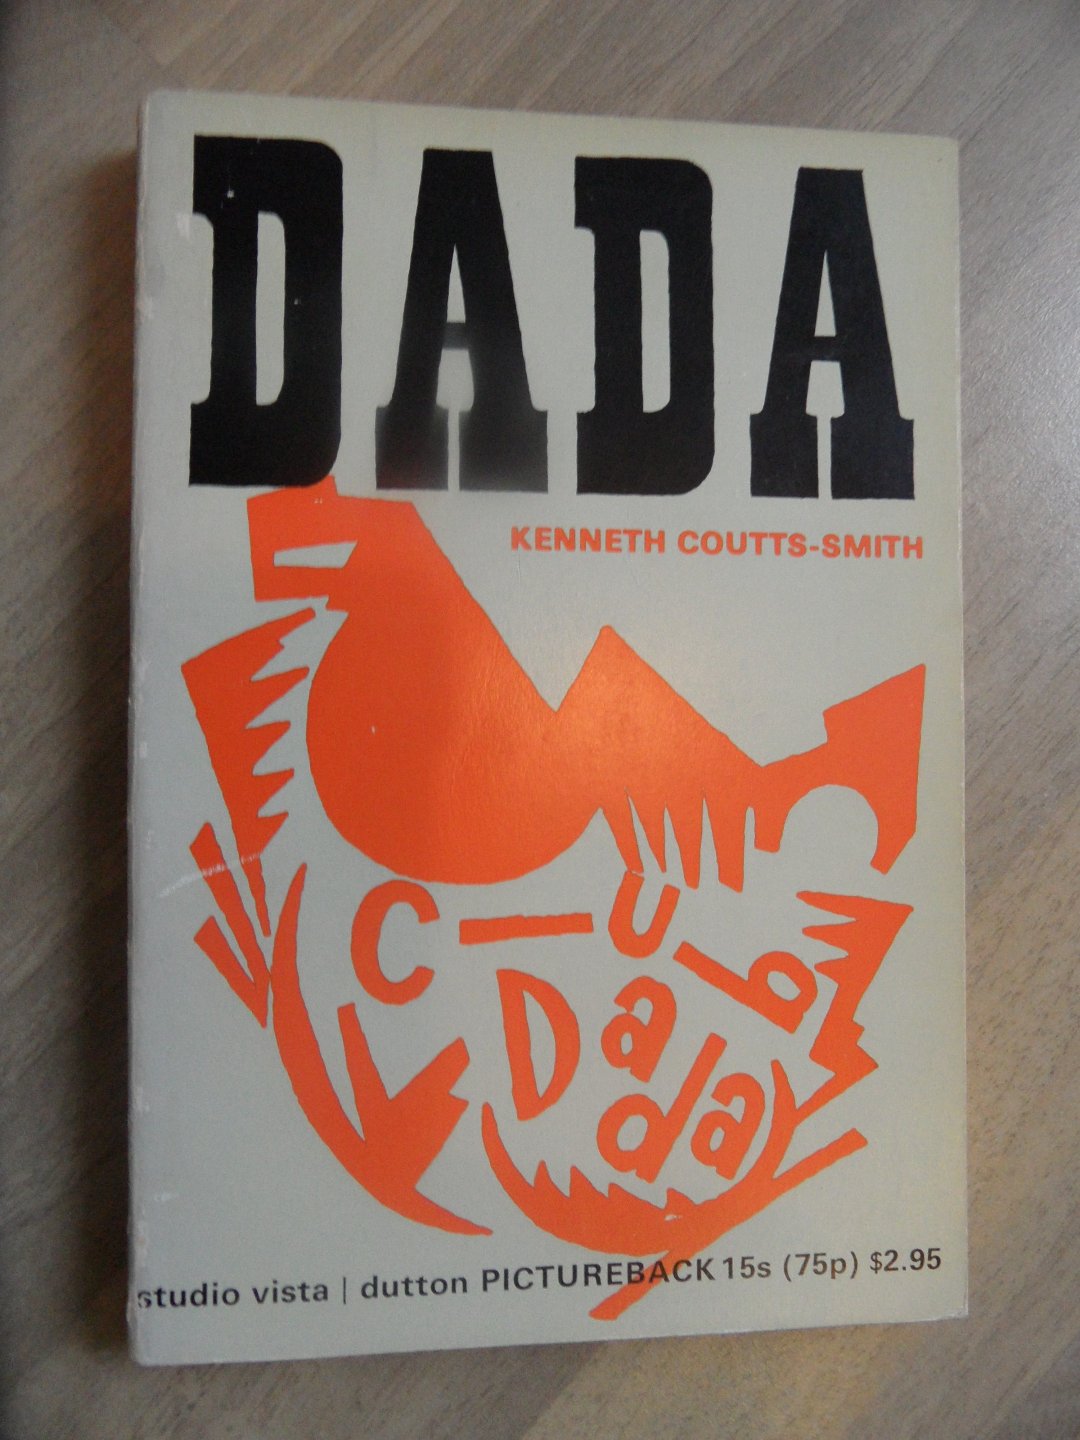 Coutts-Smith, Kenneth - Dada